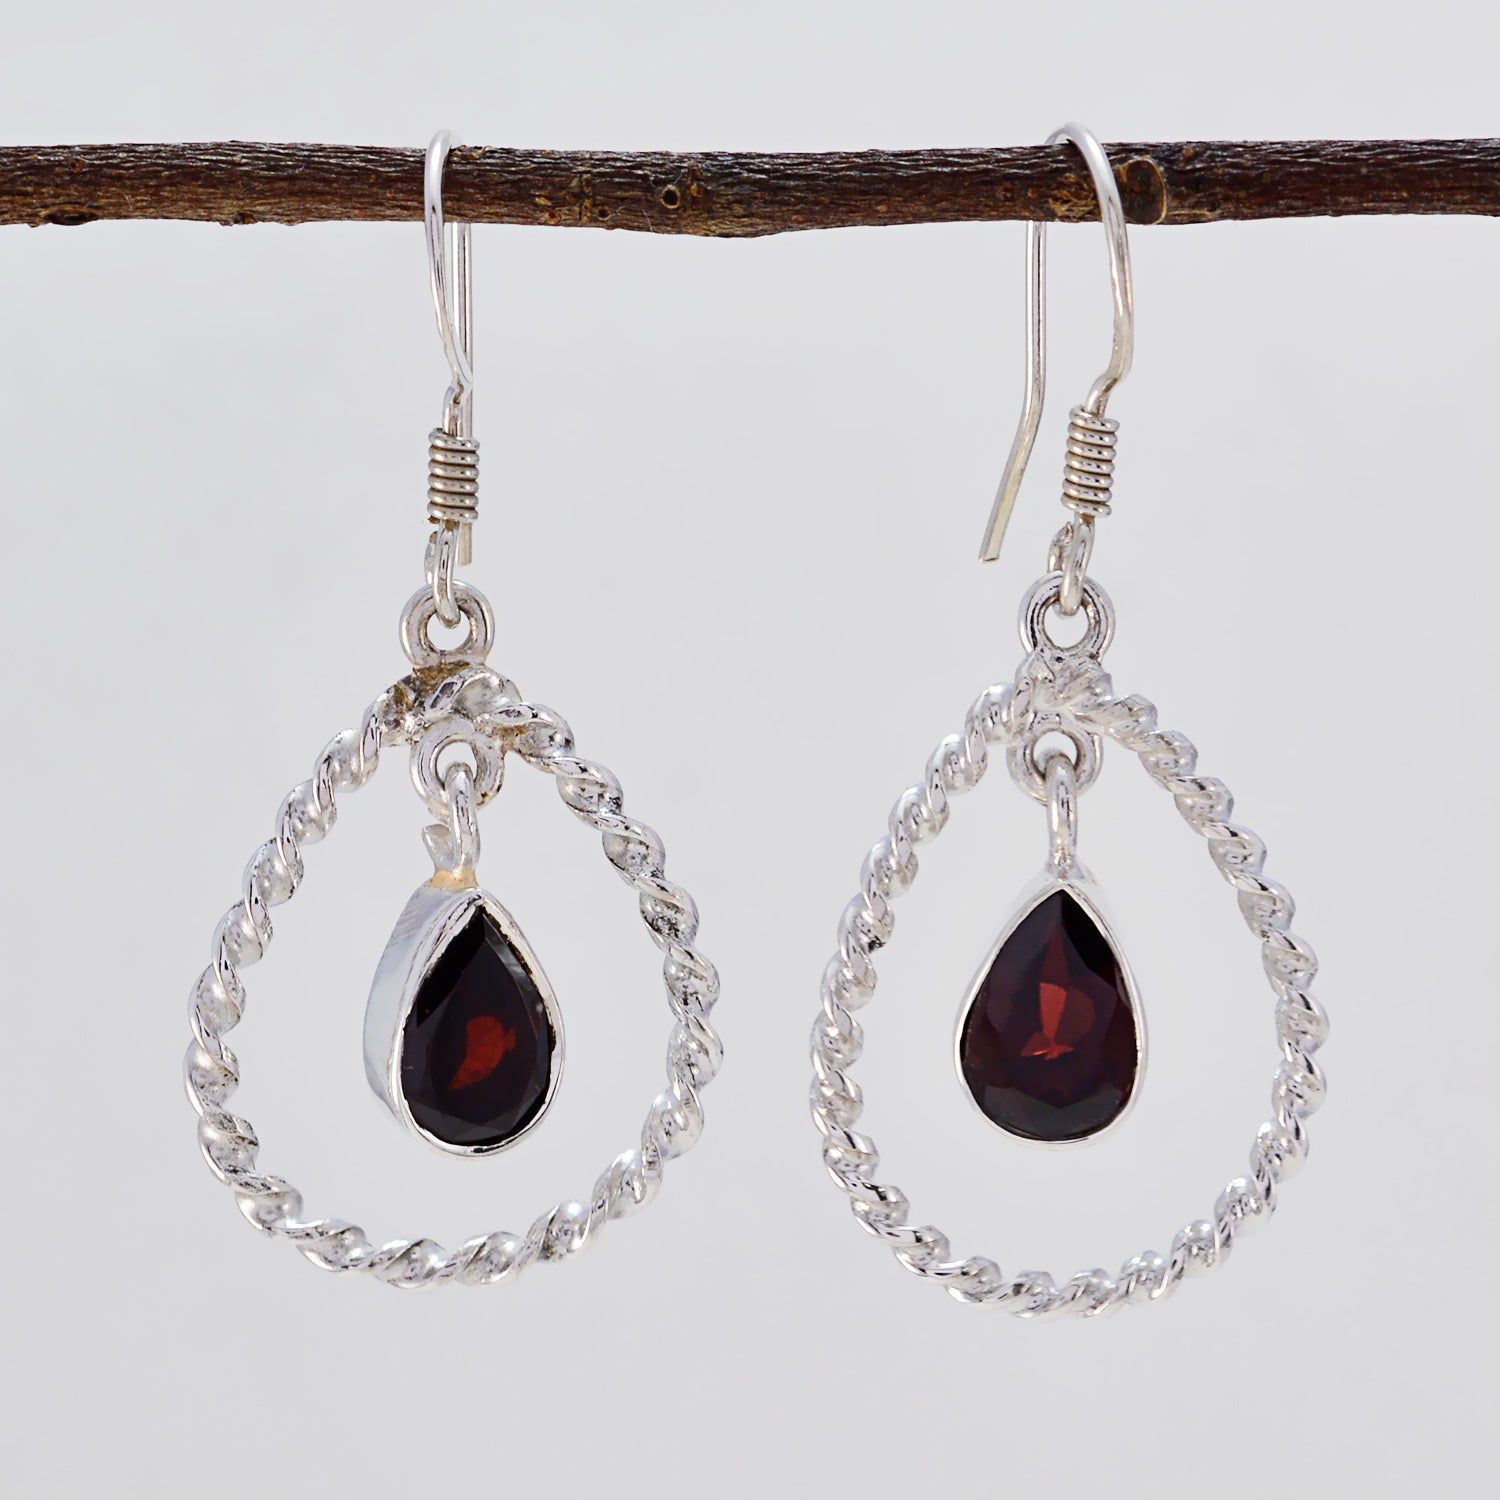 Riyo Real Gemstones pear Faceted Red Garnet Silver Earring daughter's day gift